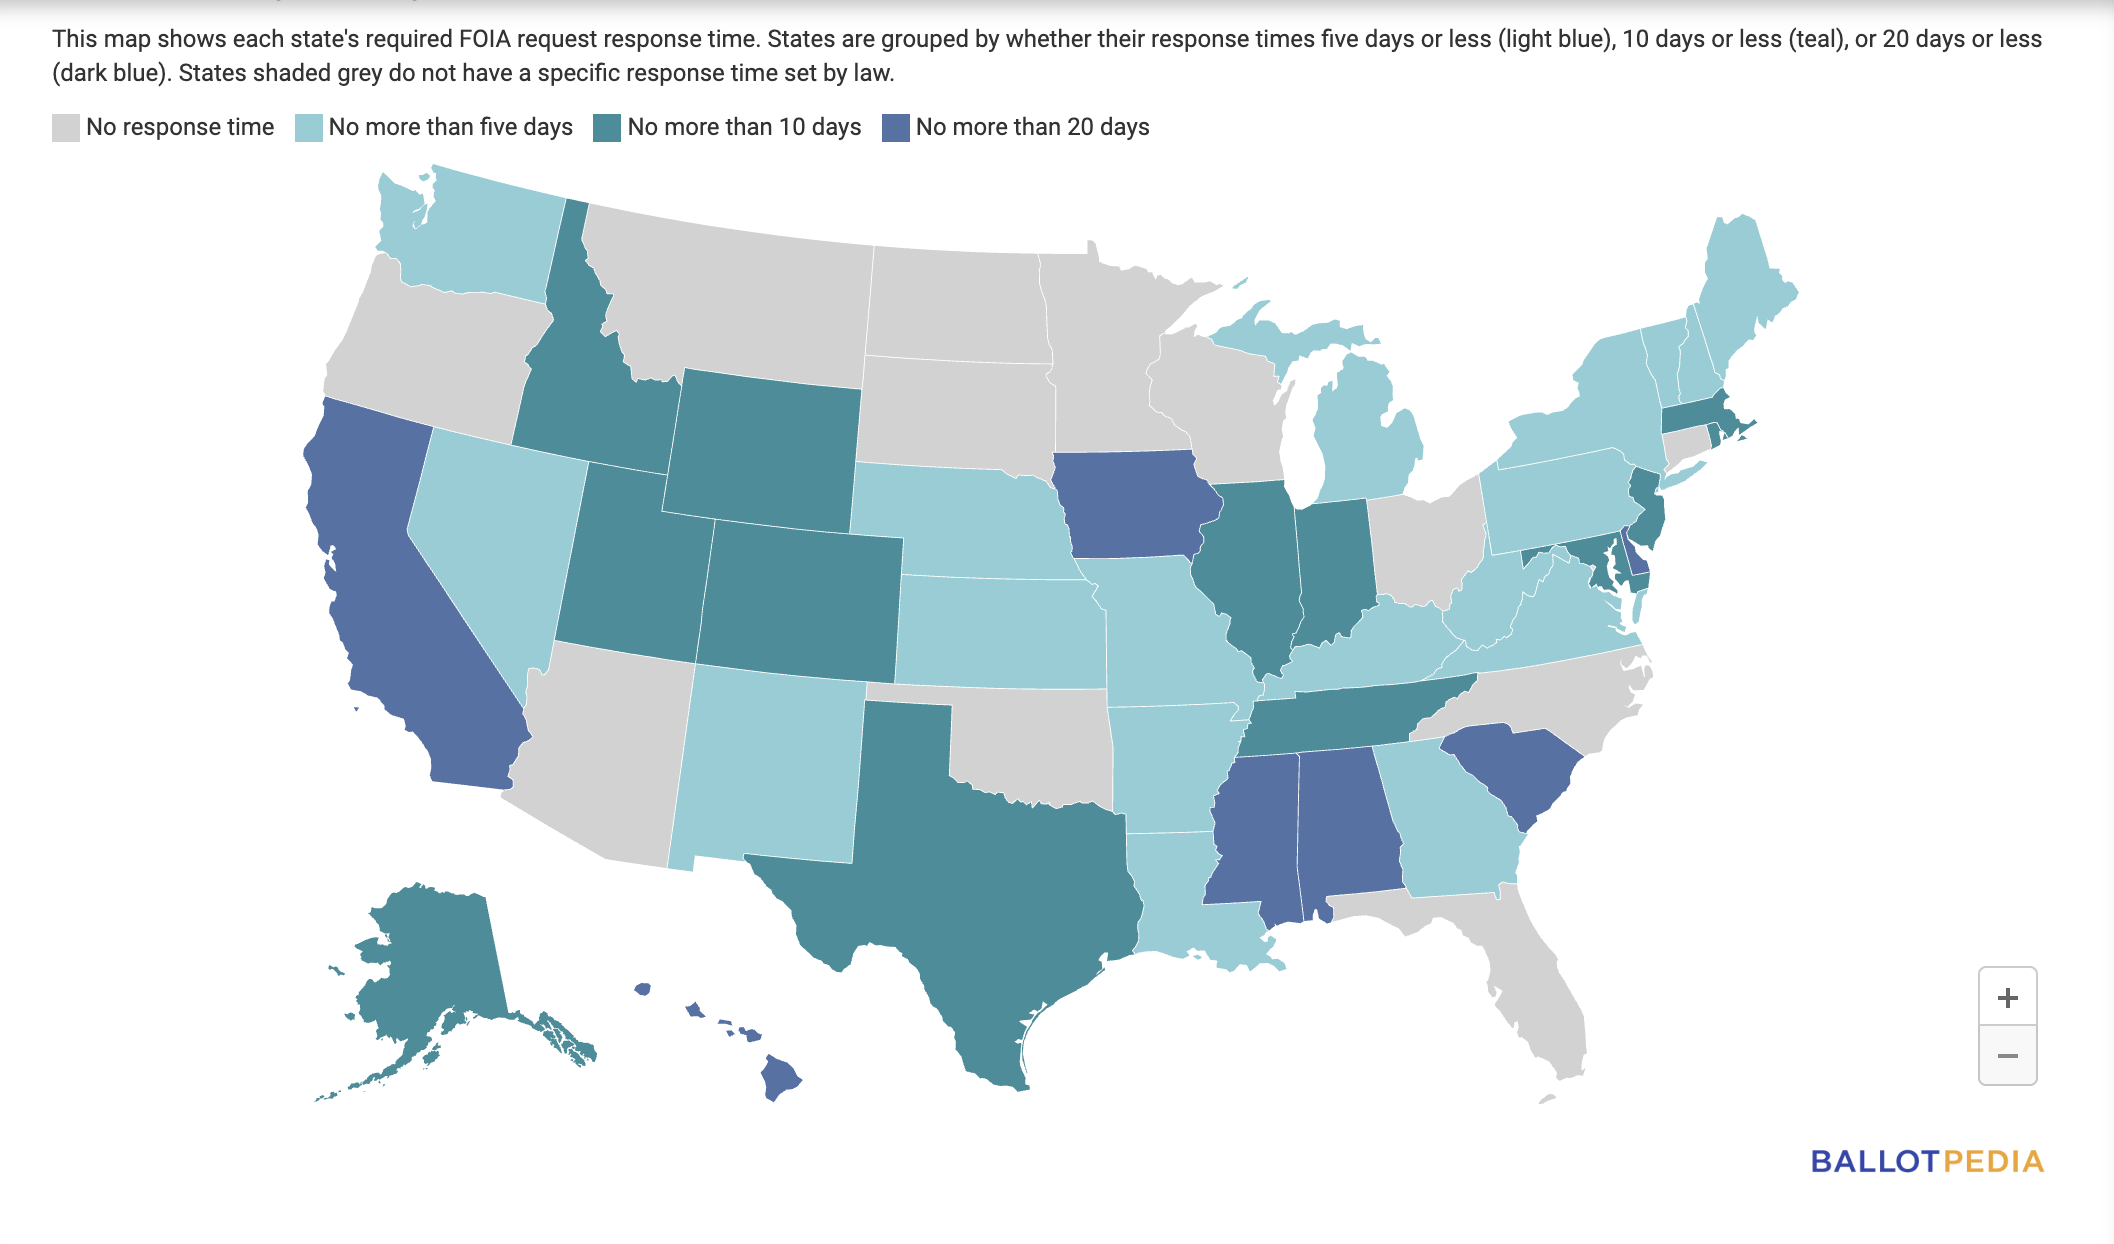 FOIA request response times by state